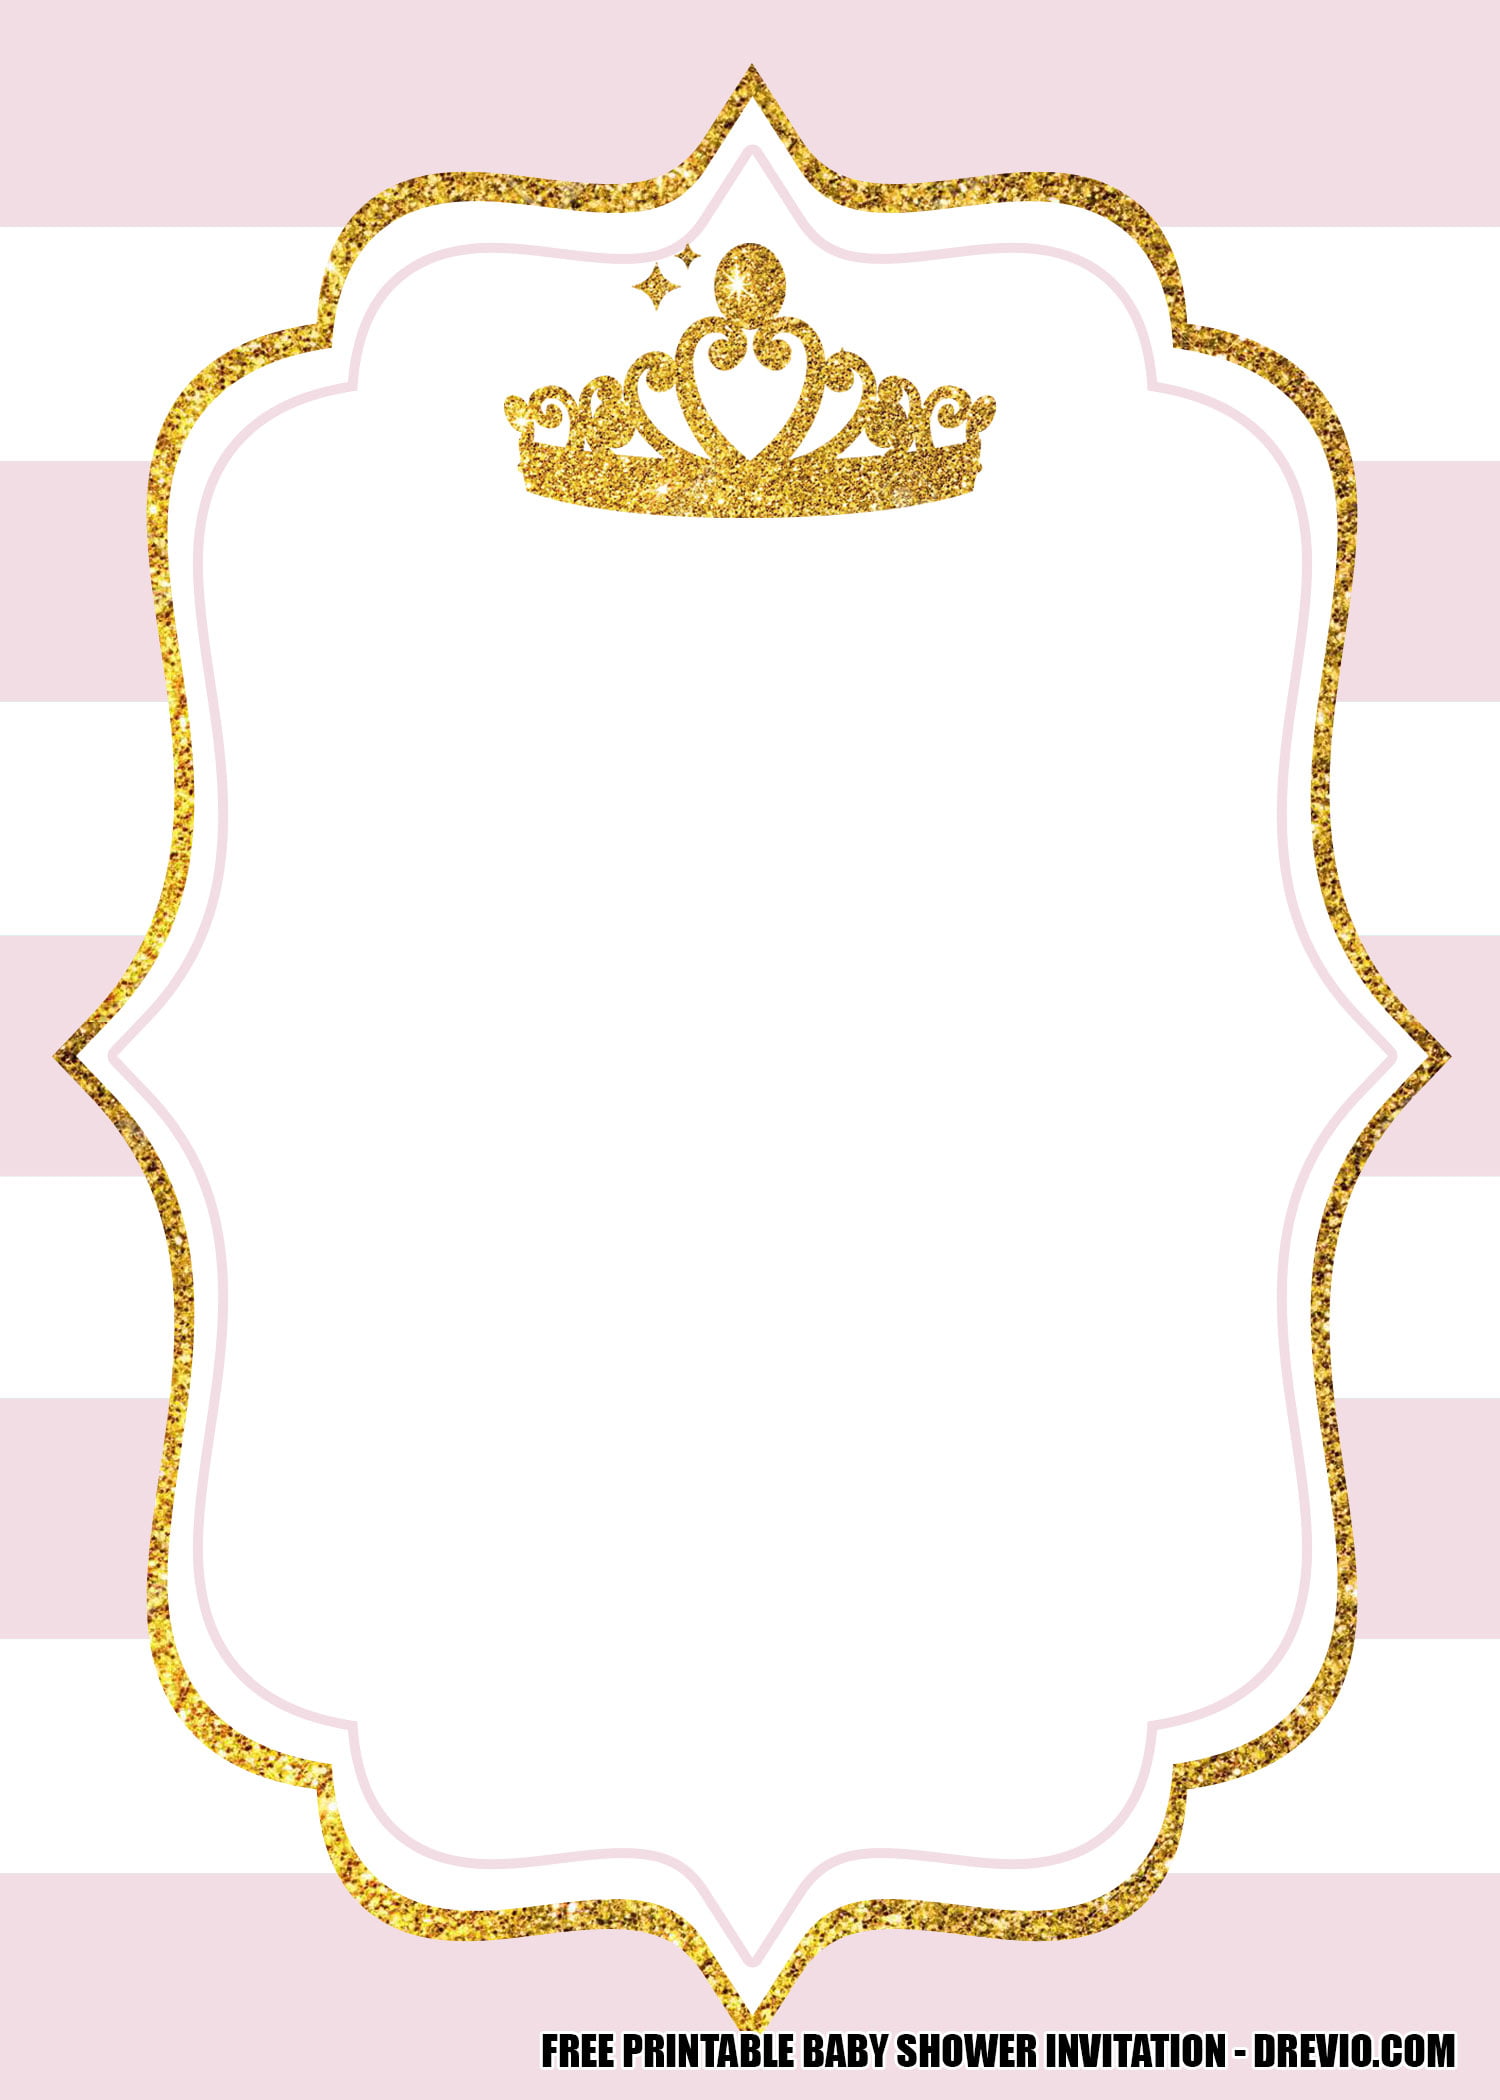 13 FREE Pink And Gold Princess Crown Themed Invitation Templates 